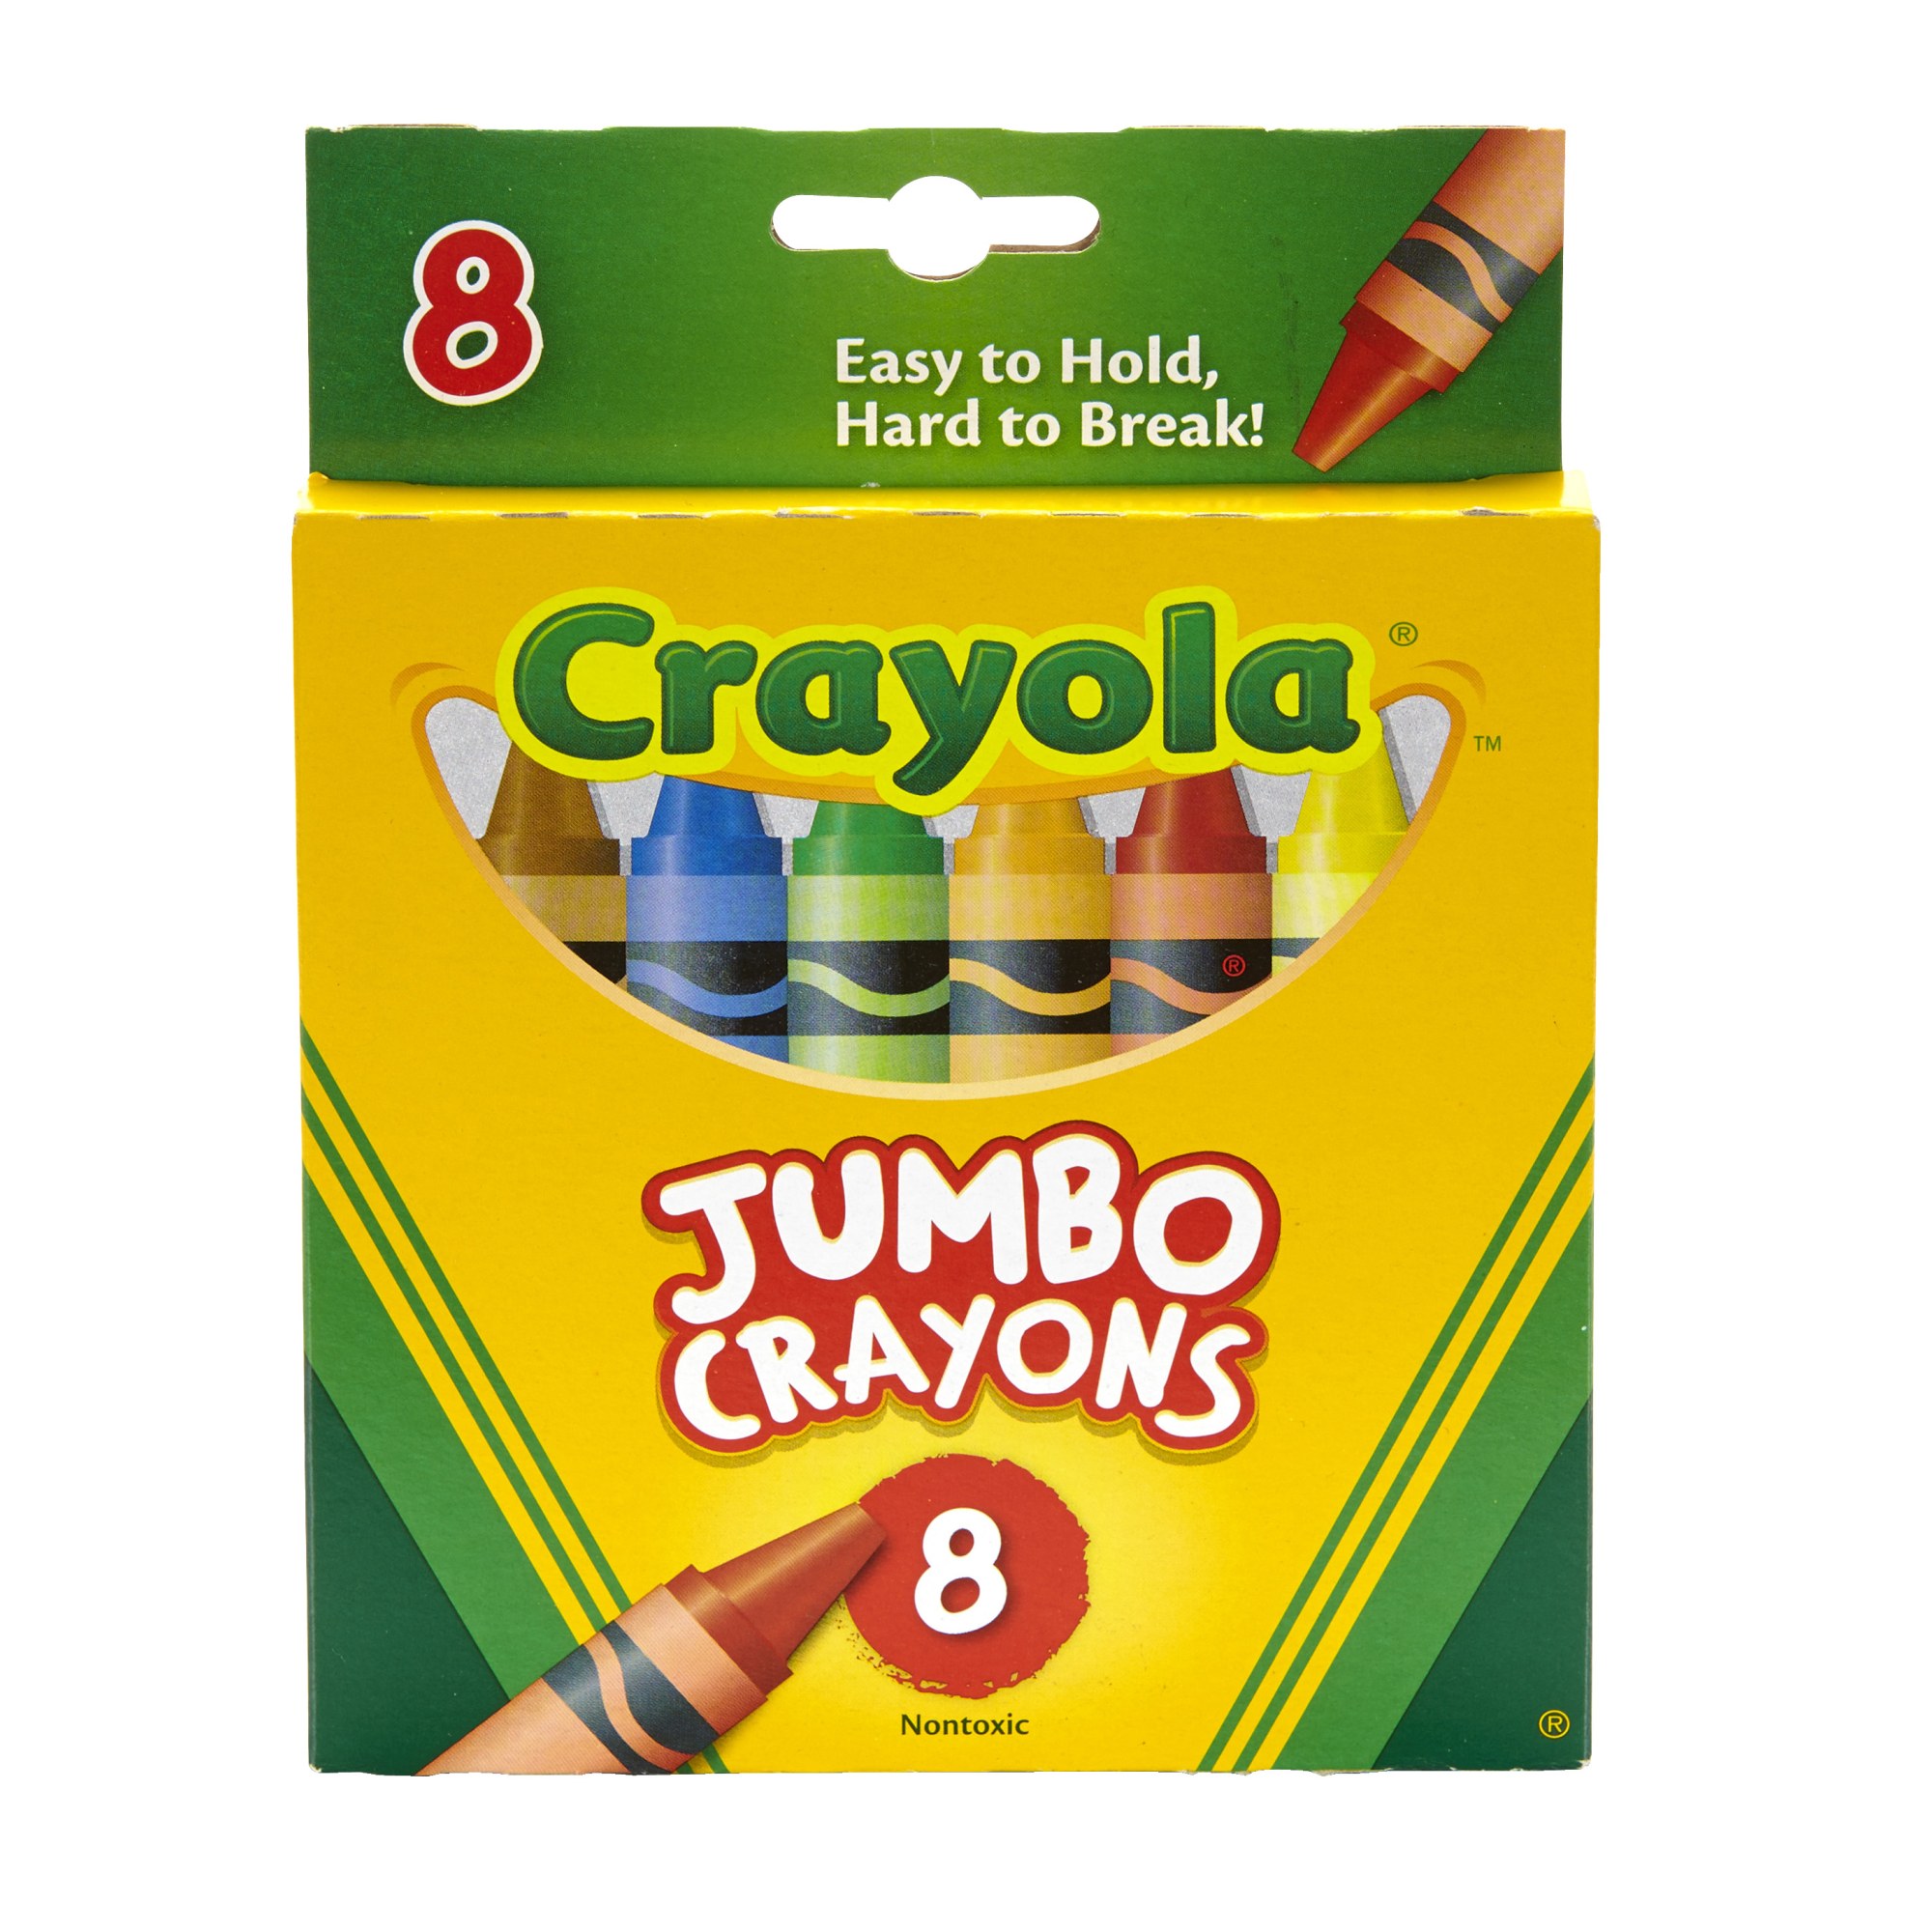 Crayola Jumbo Size Crayons for Toddlers, 8 Count, Easter Basket Stuffers for Toddlers, Gifts - image 1 of 10